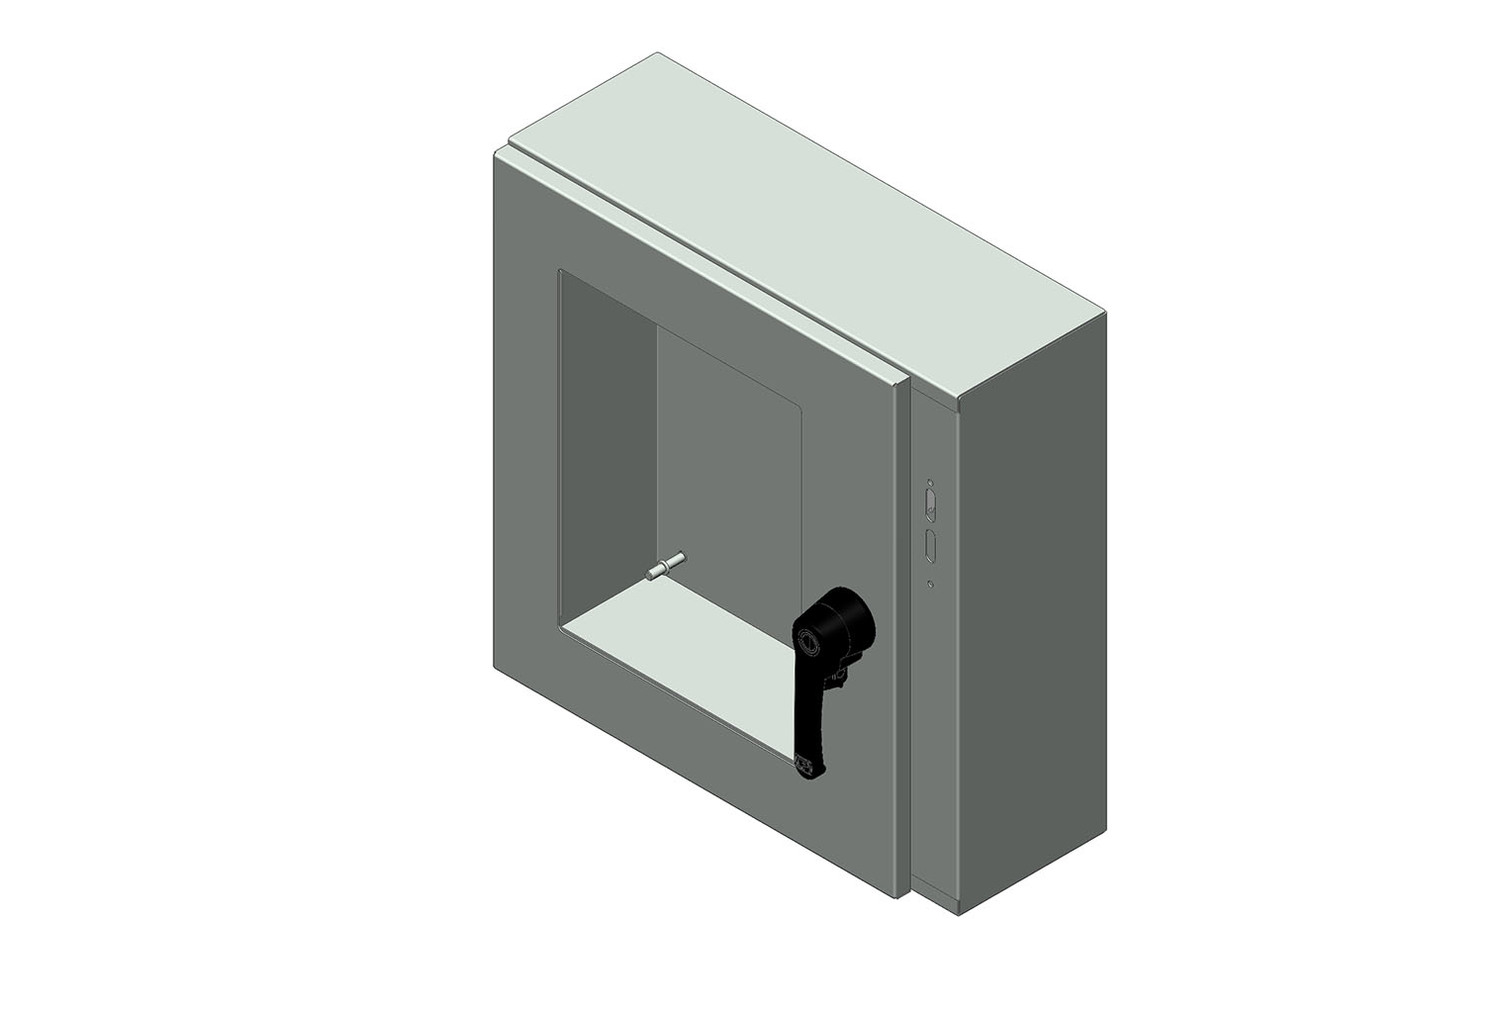 RMR Standard Wall-Mount Disconnect Enclosure, Type 4, with Solid Single Door - Image 15